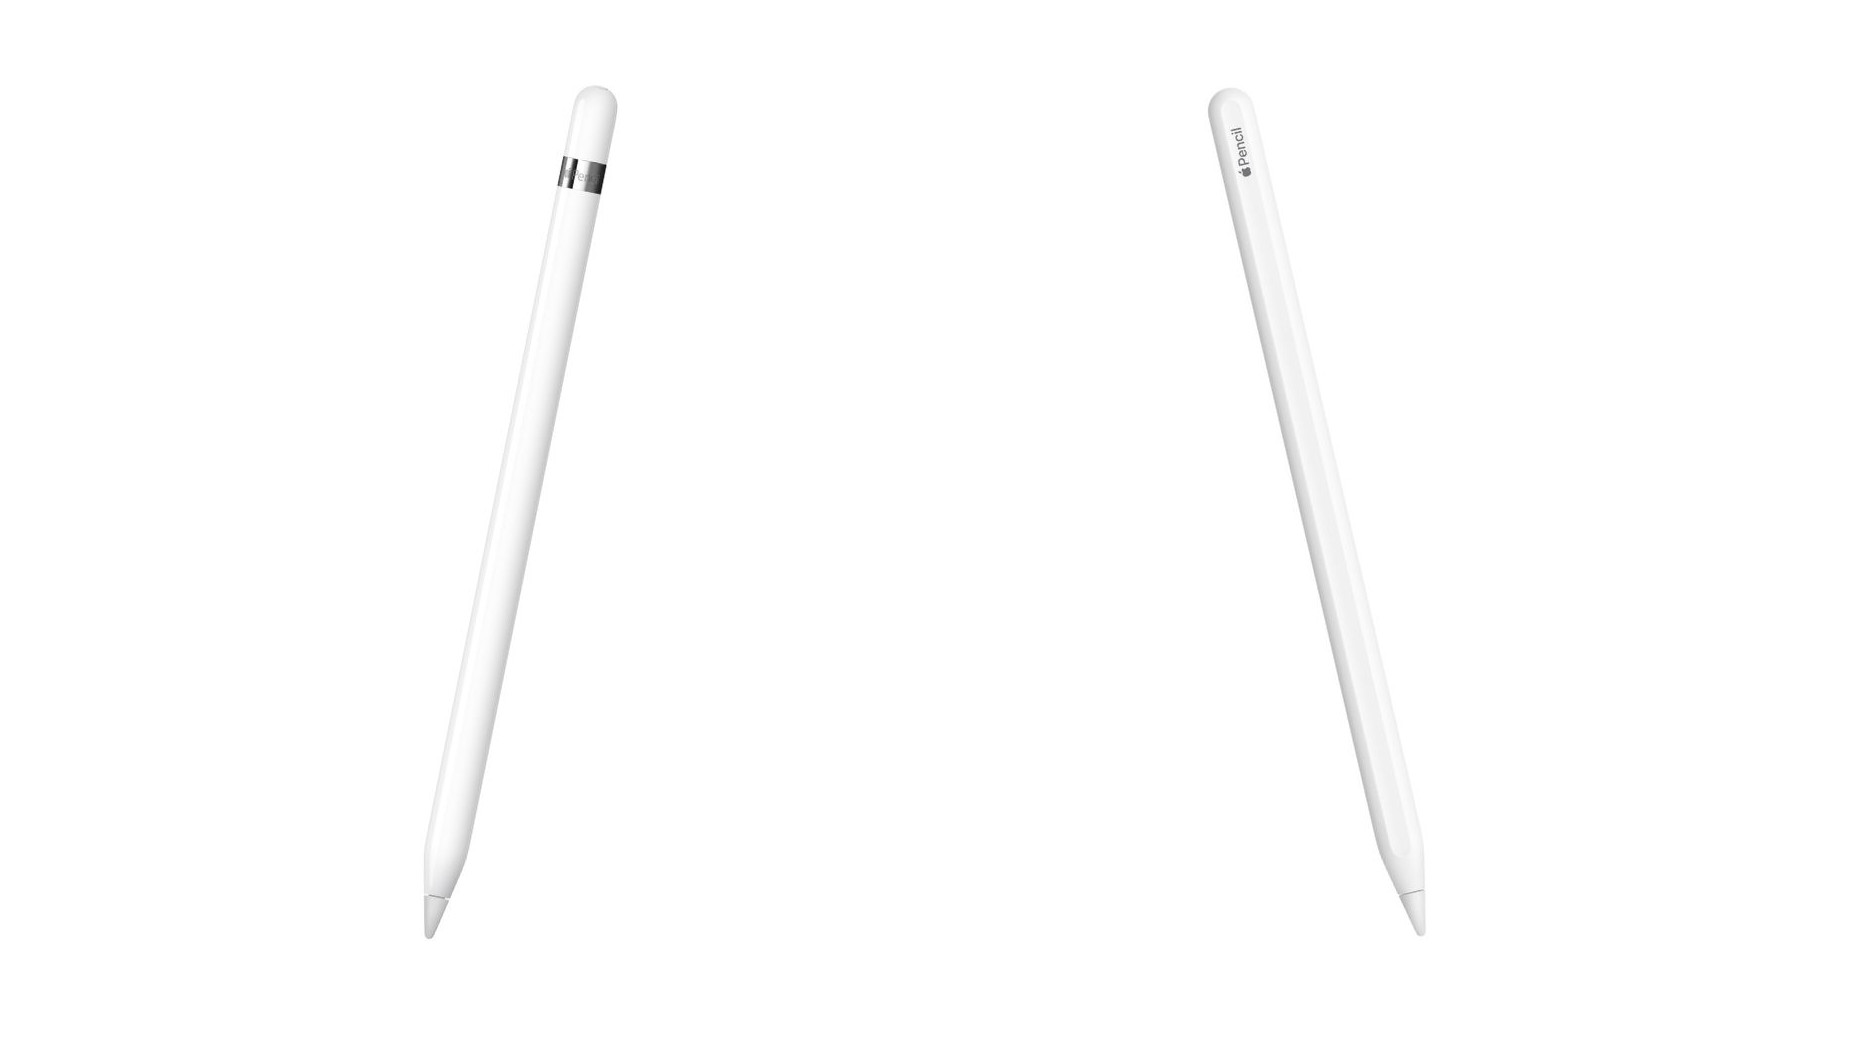 Apple Pencil vs Apple Pencil 2: Which one is best? | Creative Bloq